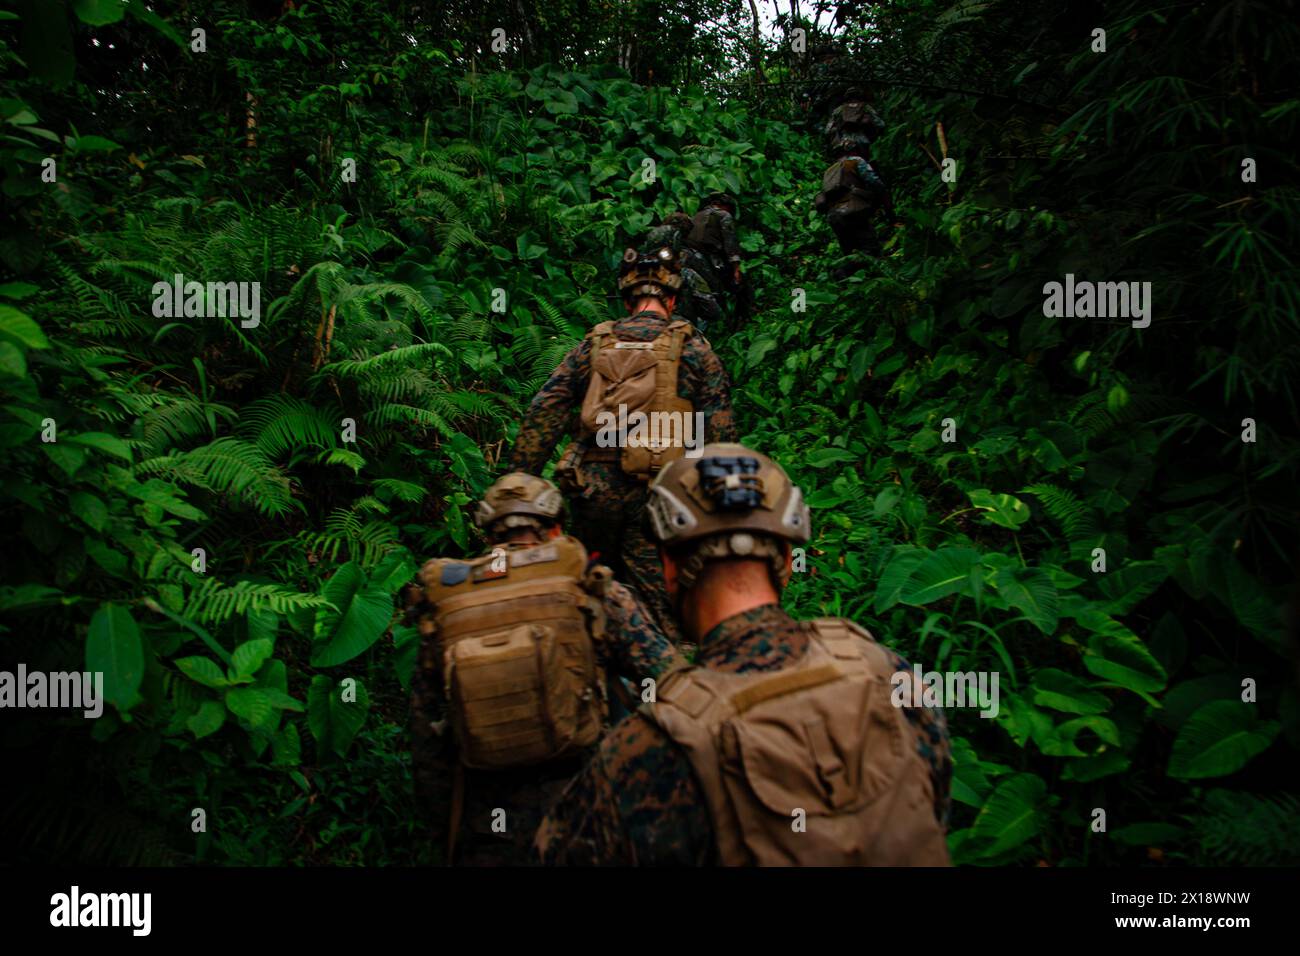 U.S. Marines with Echo Company, 2nd Battalion, 1st Marine Regiment, 1st Marine Division, alongside Philippine marines with the 1st Marine Brigade, conduct a jungle patrol during Marine Exercise 2024 near Cotabato City, Mindanao, Philippines, April 9, 2024. MAREX 2024 is a bilateral exercise between the U.S. Marine Corps and the Philippine Marine Corps designed to further enhance relationships, interoperability, and combined arms capabilities in a realistic training environment. (U.S. Marine Corps photo by Sgt. Ryan Hageali) Stock Photo